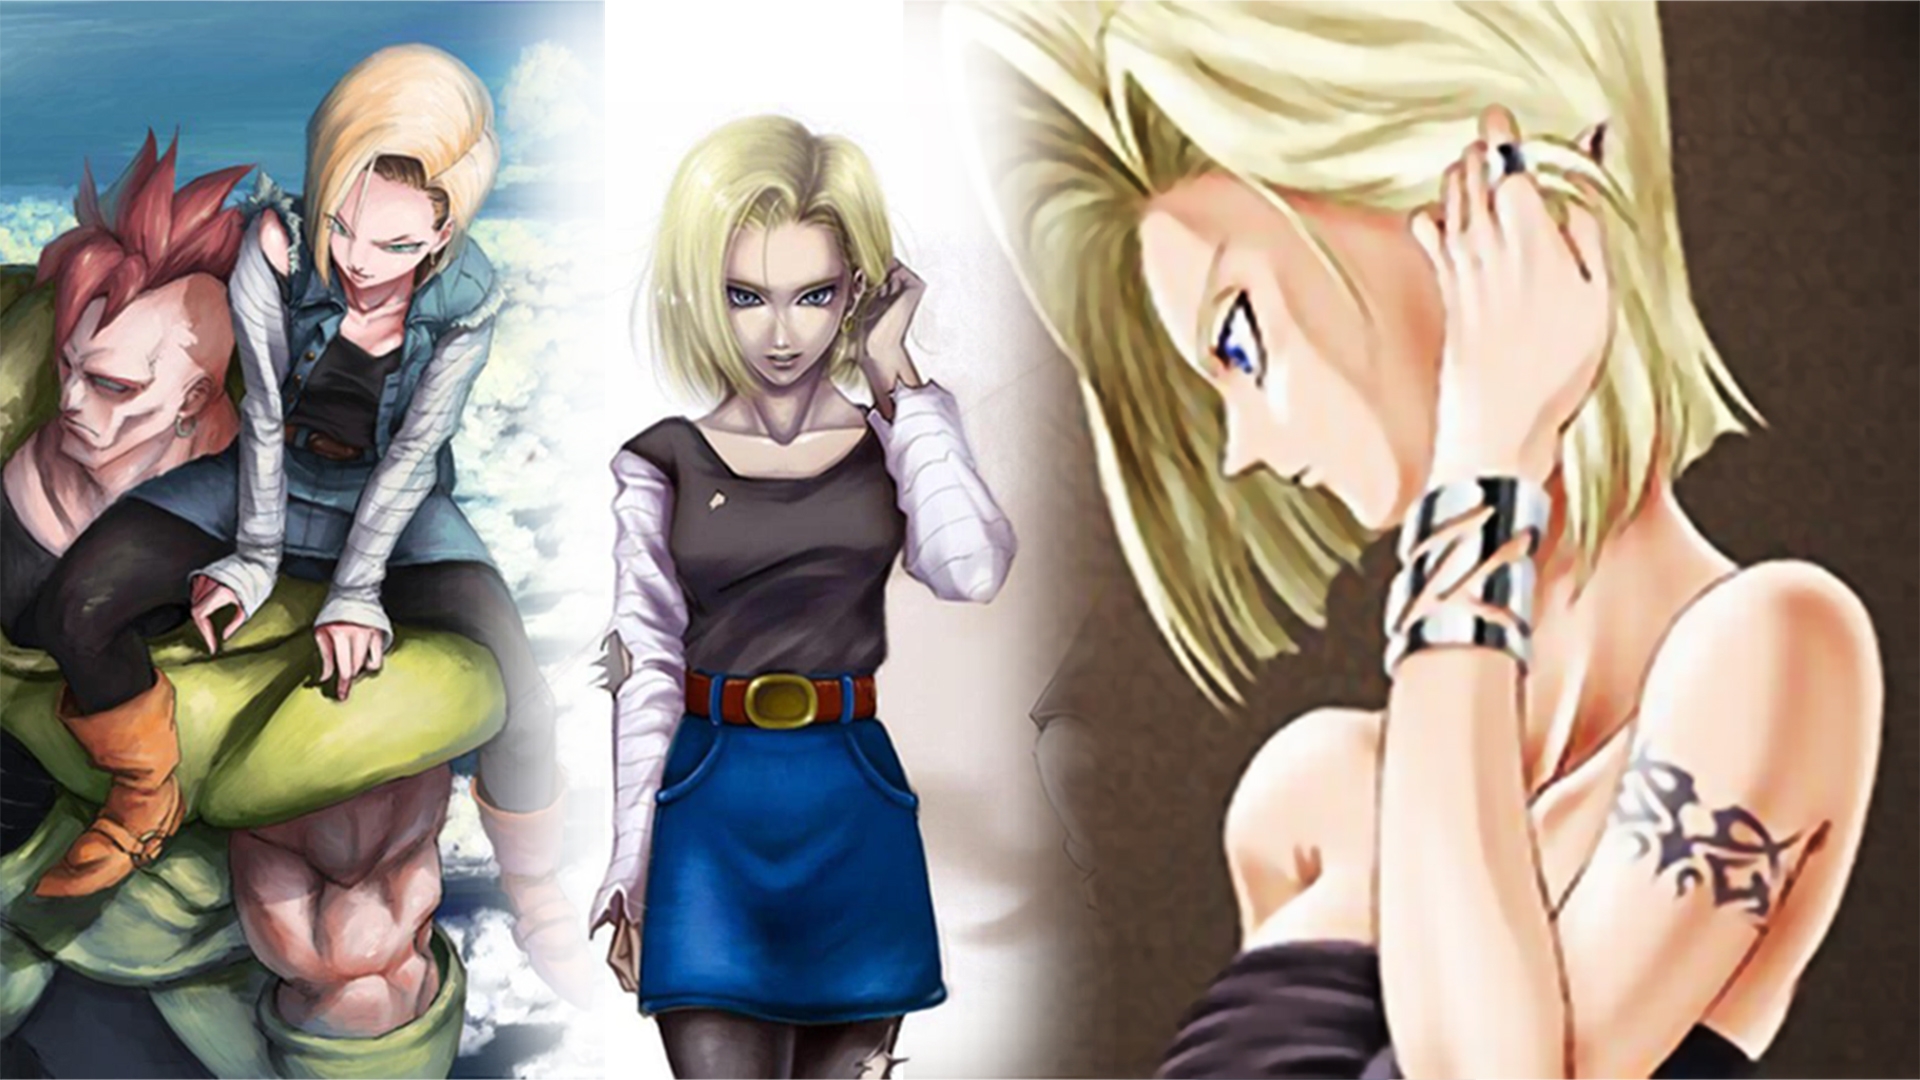 android 18壁紙,漫画,アニメ,ブロンド,アニメ,楽しい